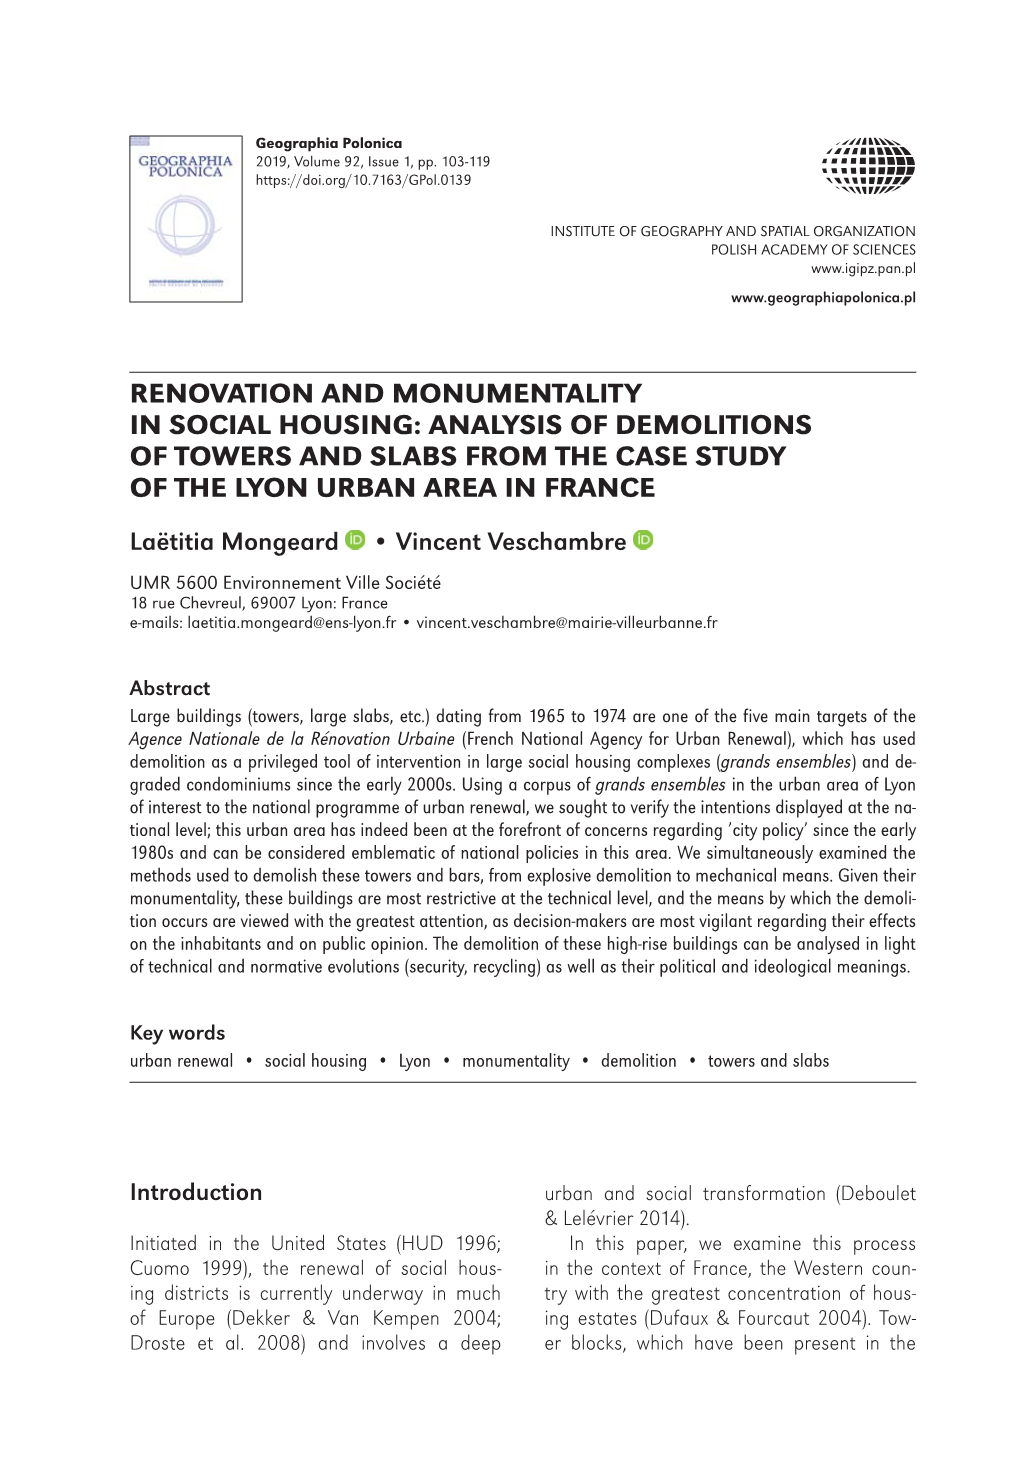 Renovation and Monumentality in Social Housing: Analysis of Demolitions of Towers and Slabs from the Case Study of the Lyon Urban Area in France